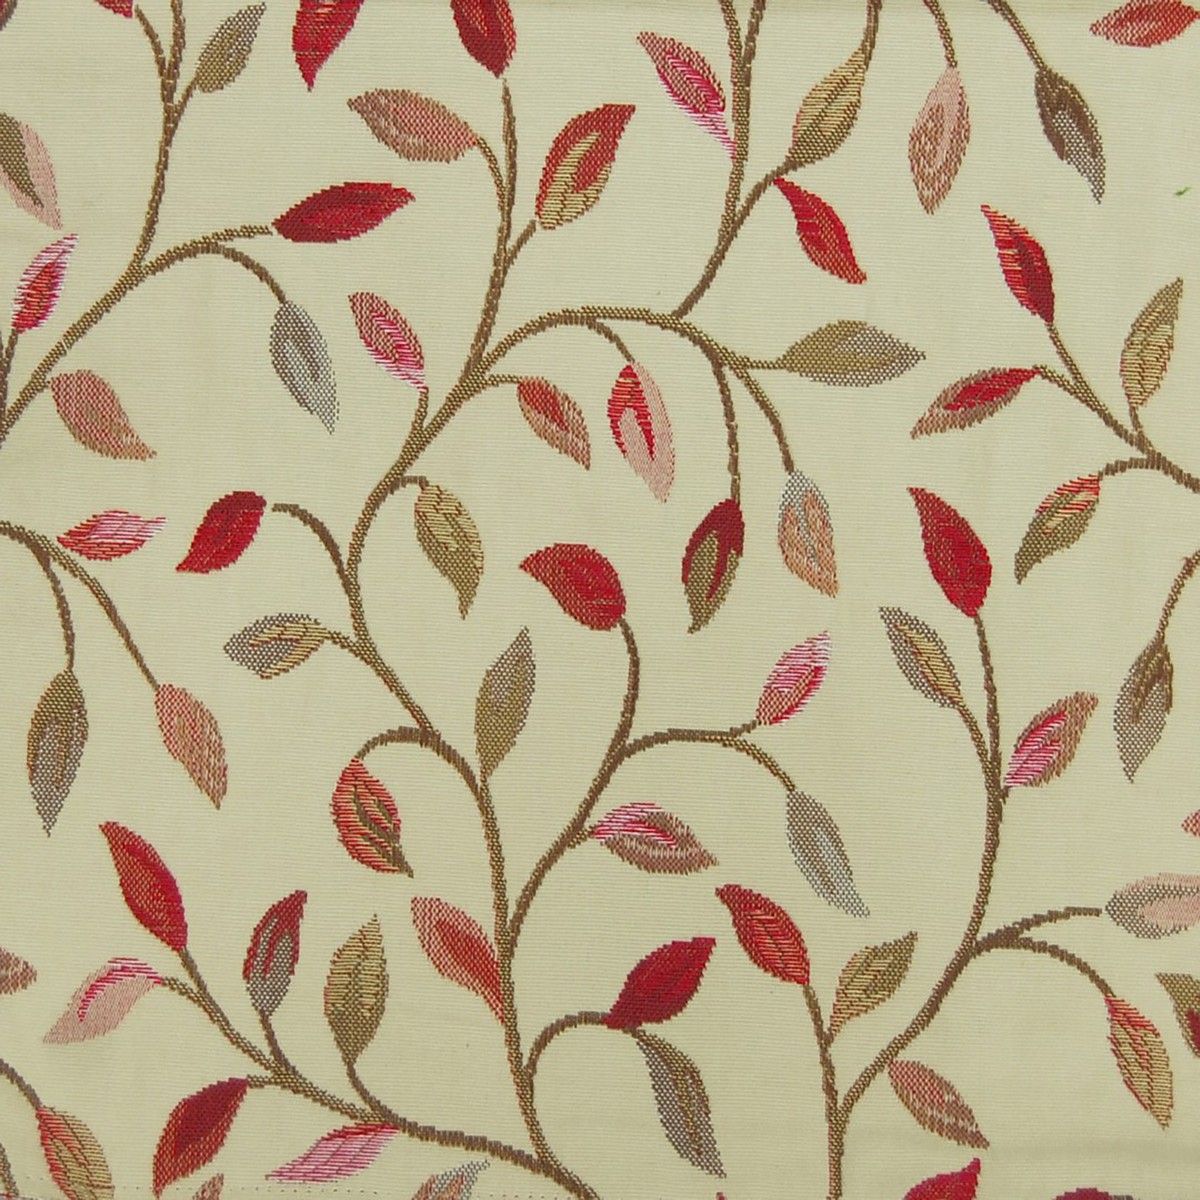 Cervino Red Nut Fabric by Voyage Maison